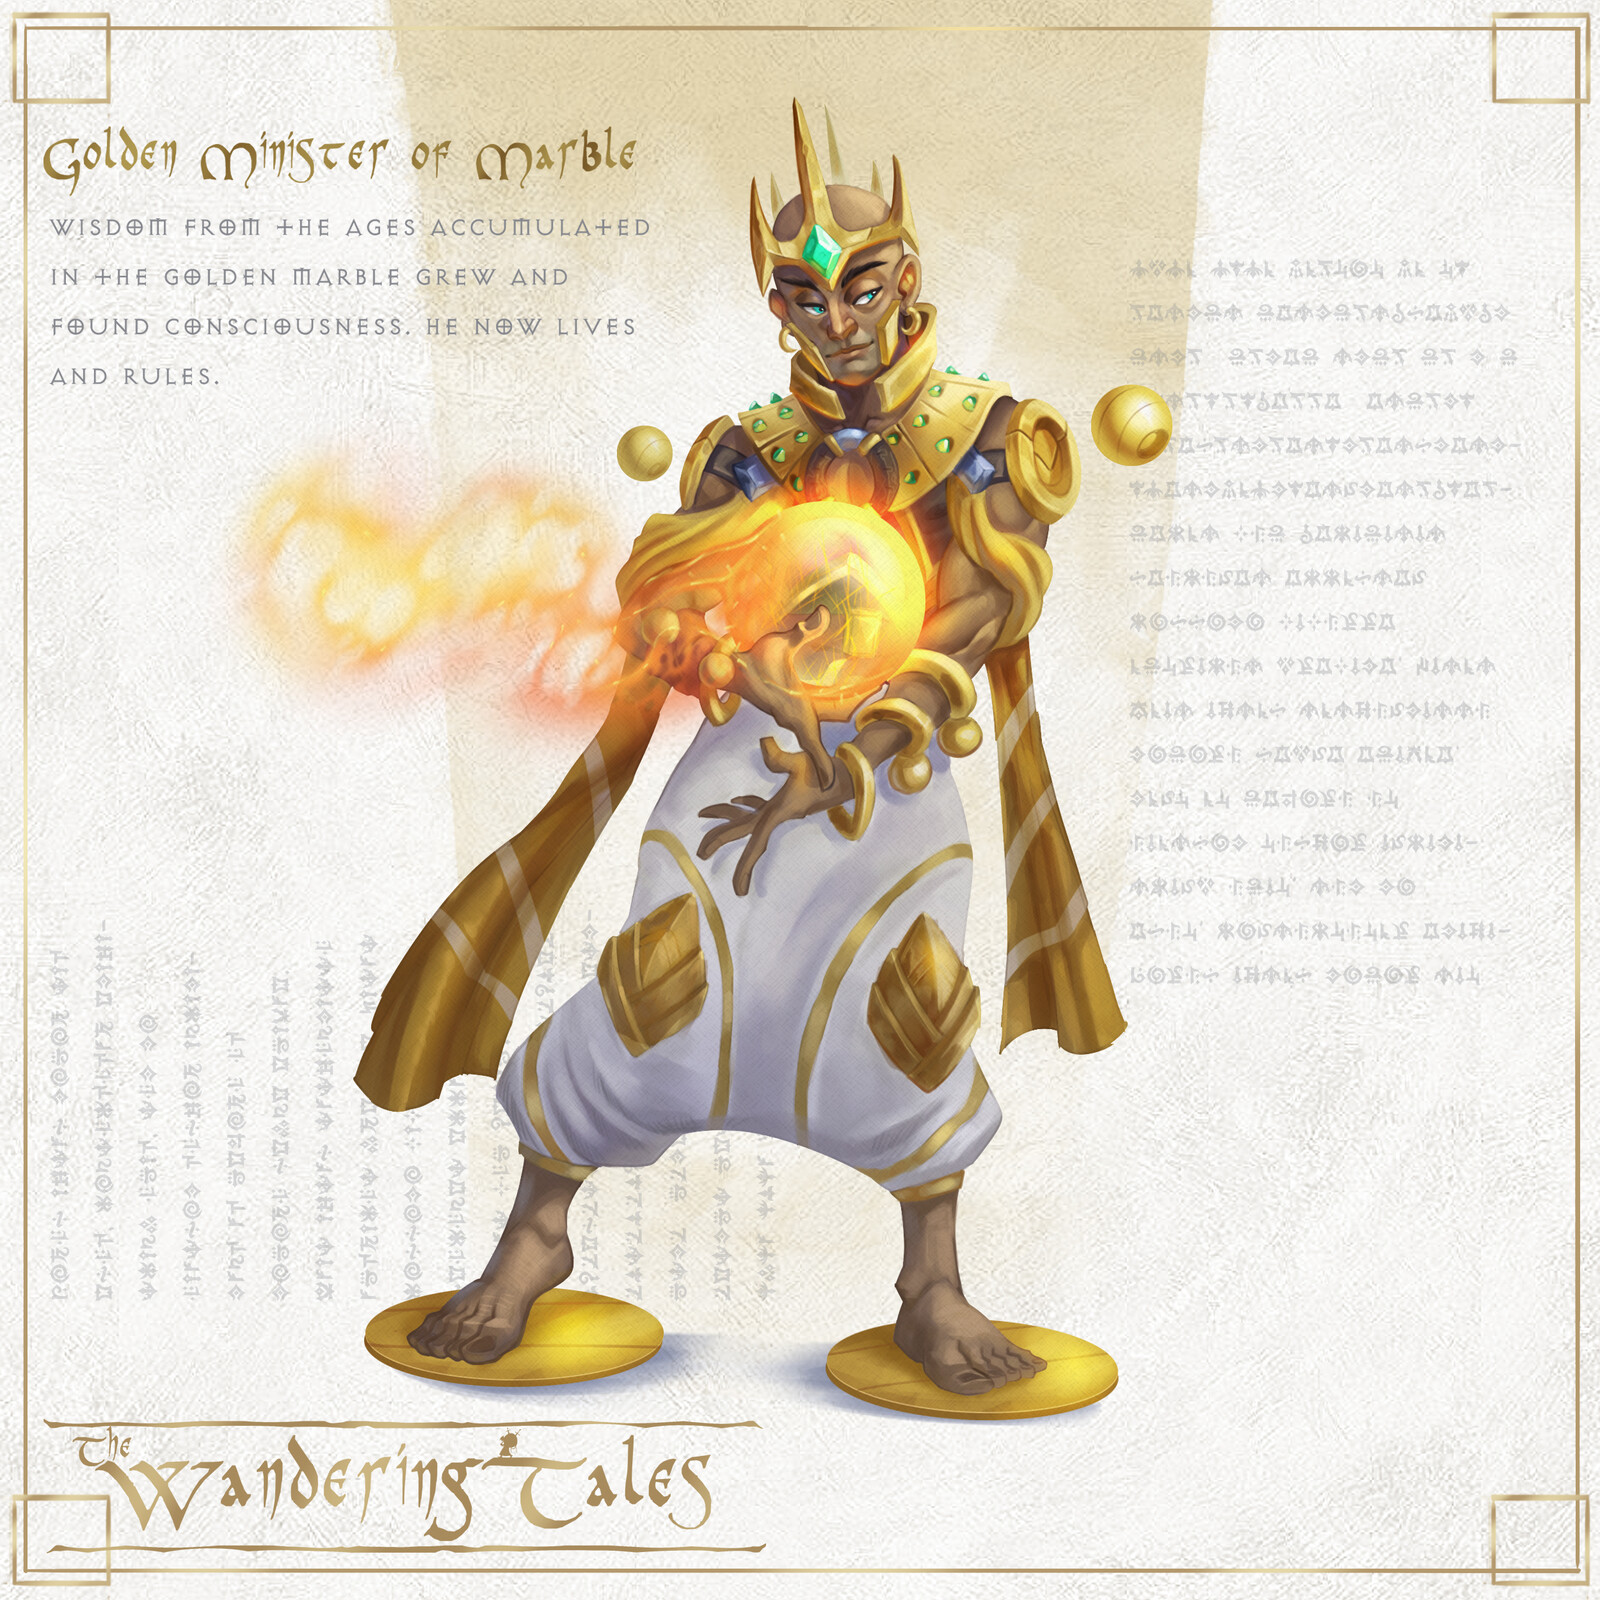 Golden Minister of Marble | The Wandering Tales